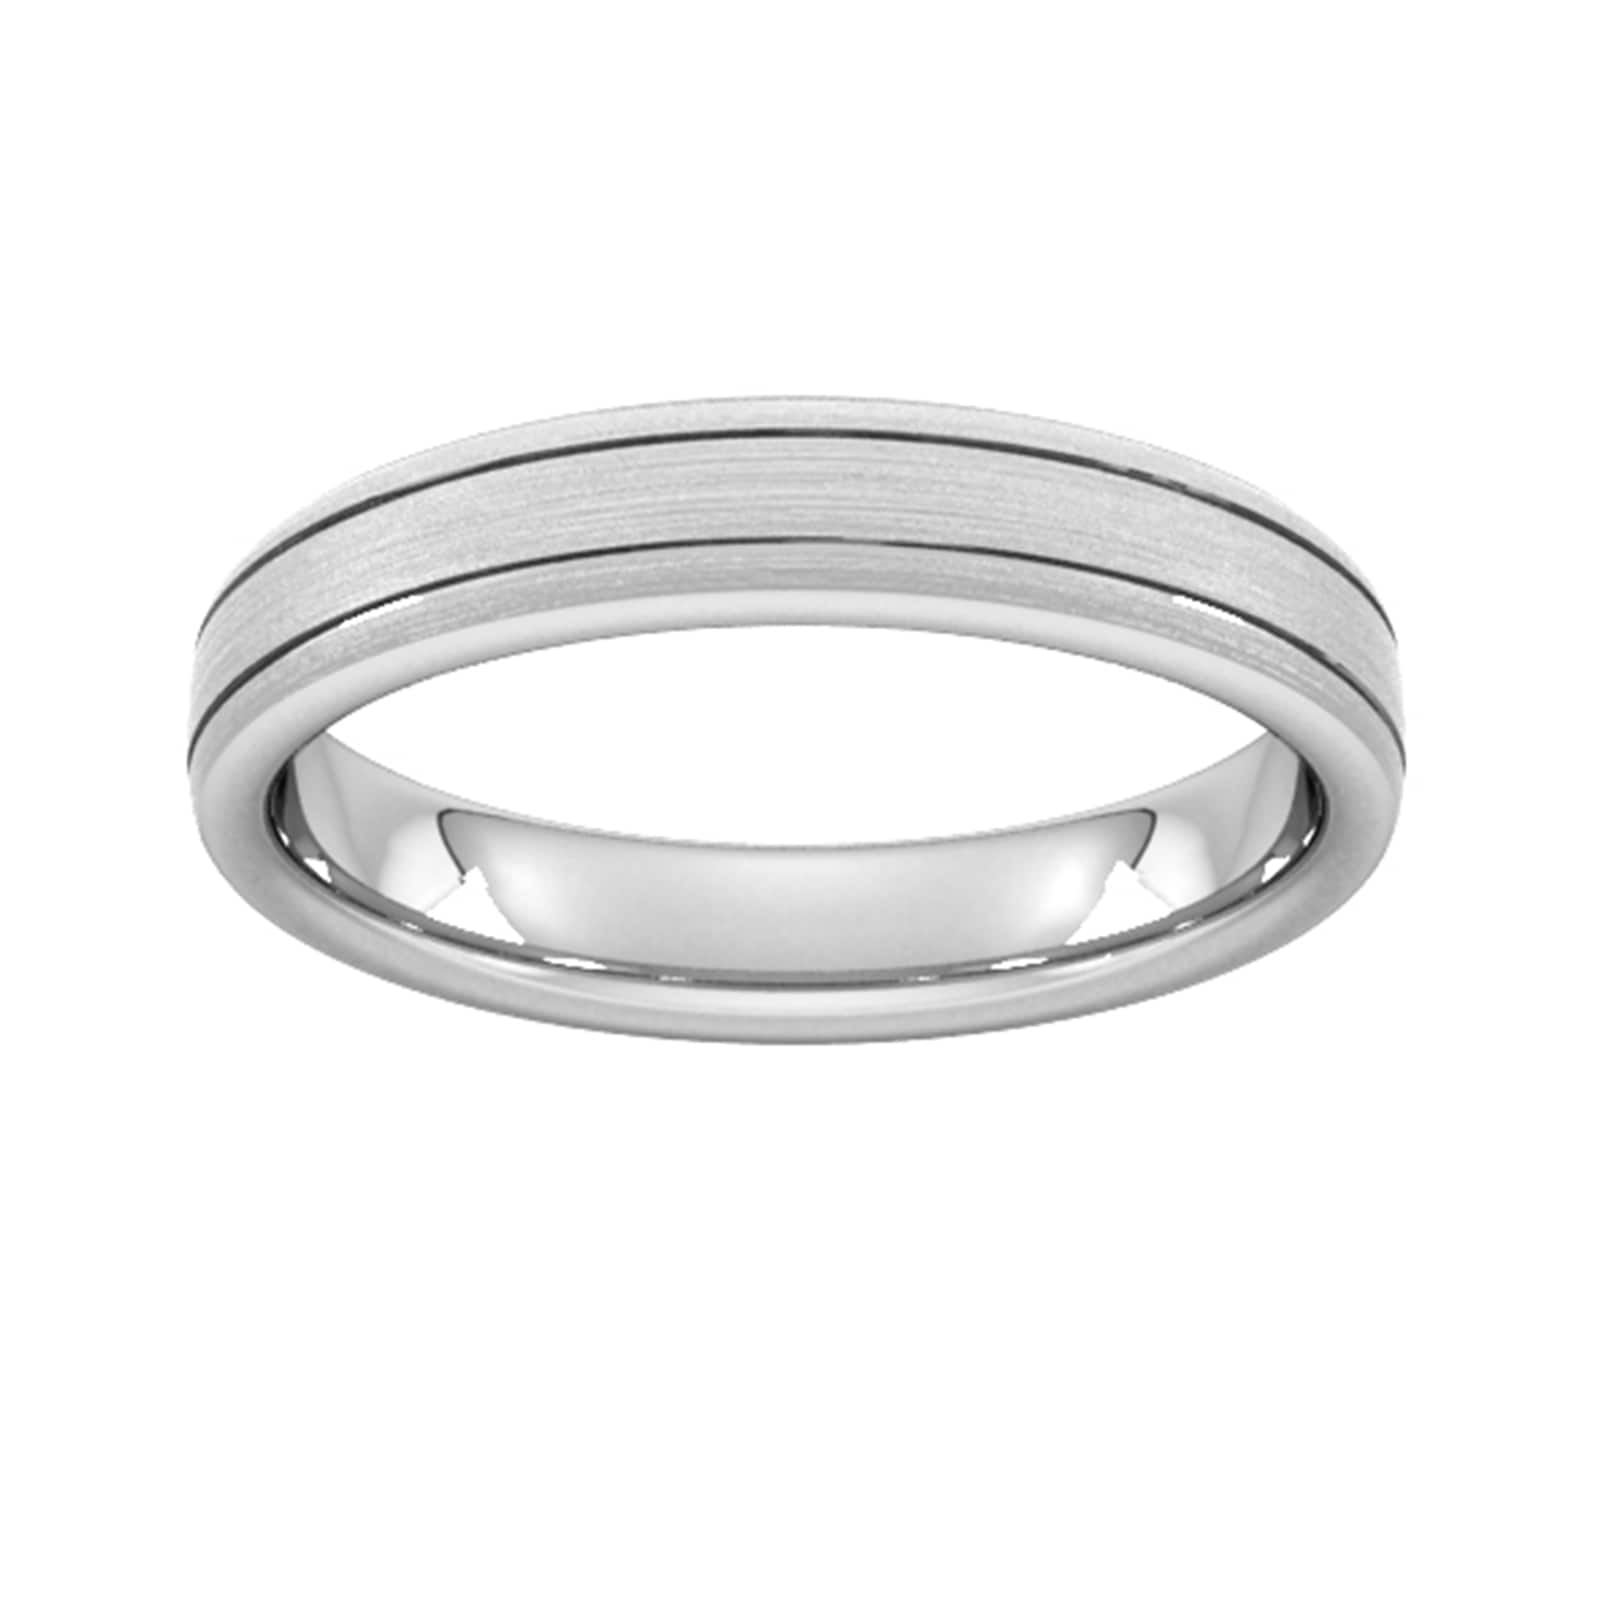 4mm Slight Court Extra Heavy Matt Finish With Double Grooves Wedding Ring In 18 Carat White Gold - Ring Size J